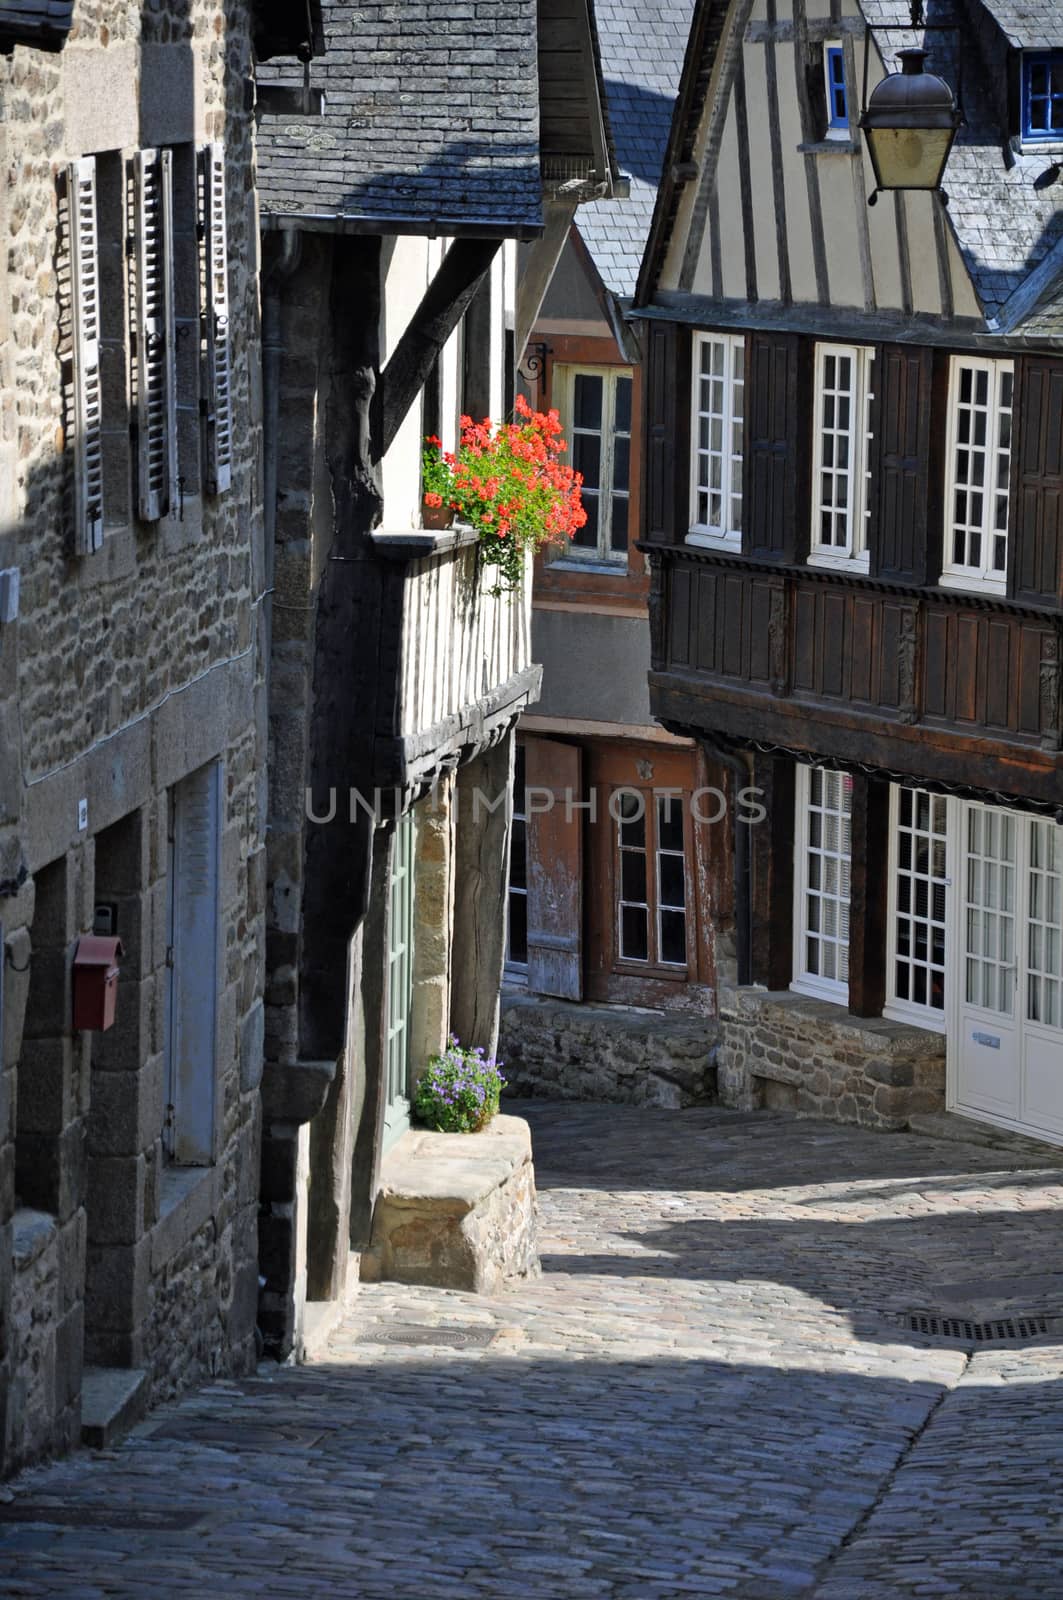 A medieval half-timbered buildings in the Rue de Jerzual, in the ancient french town of Dinan in Brittany.